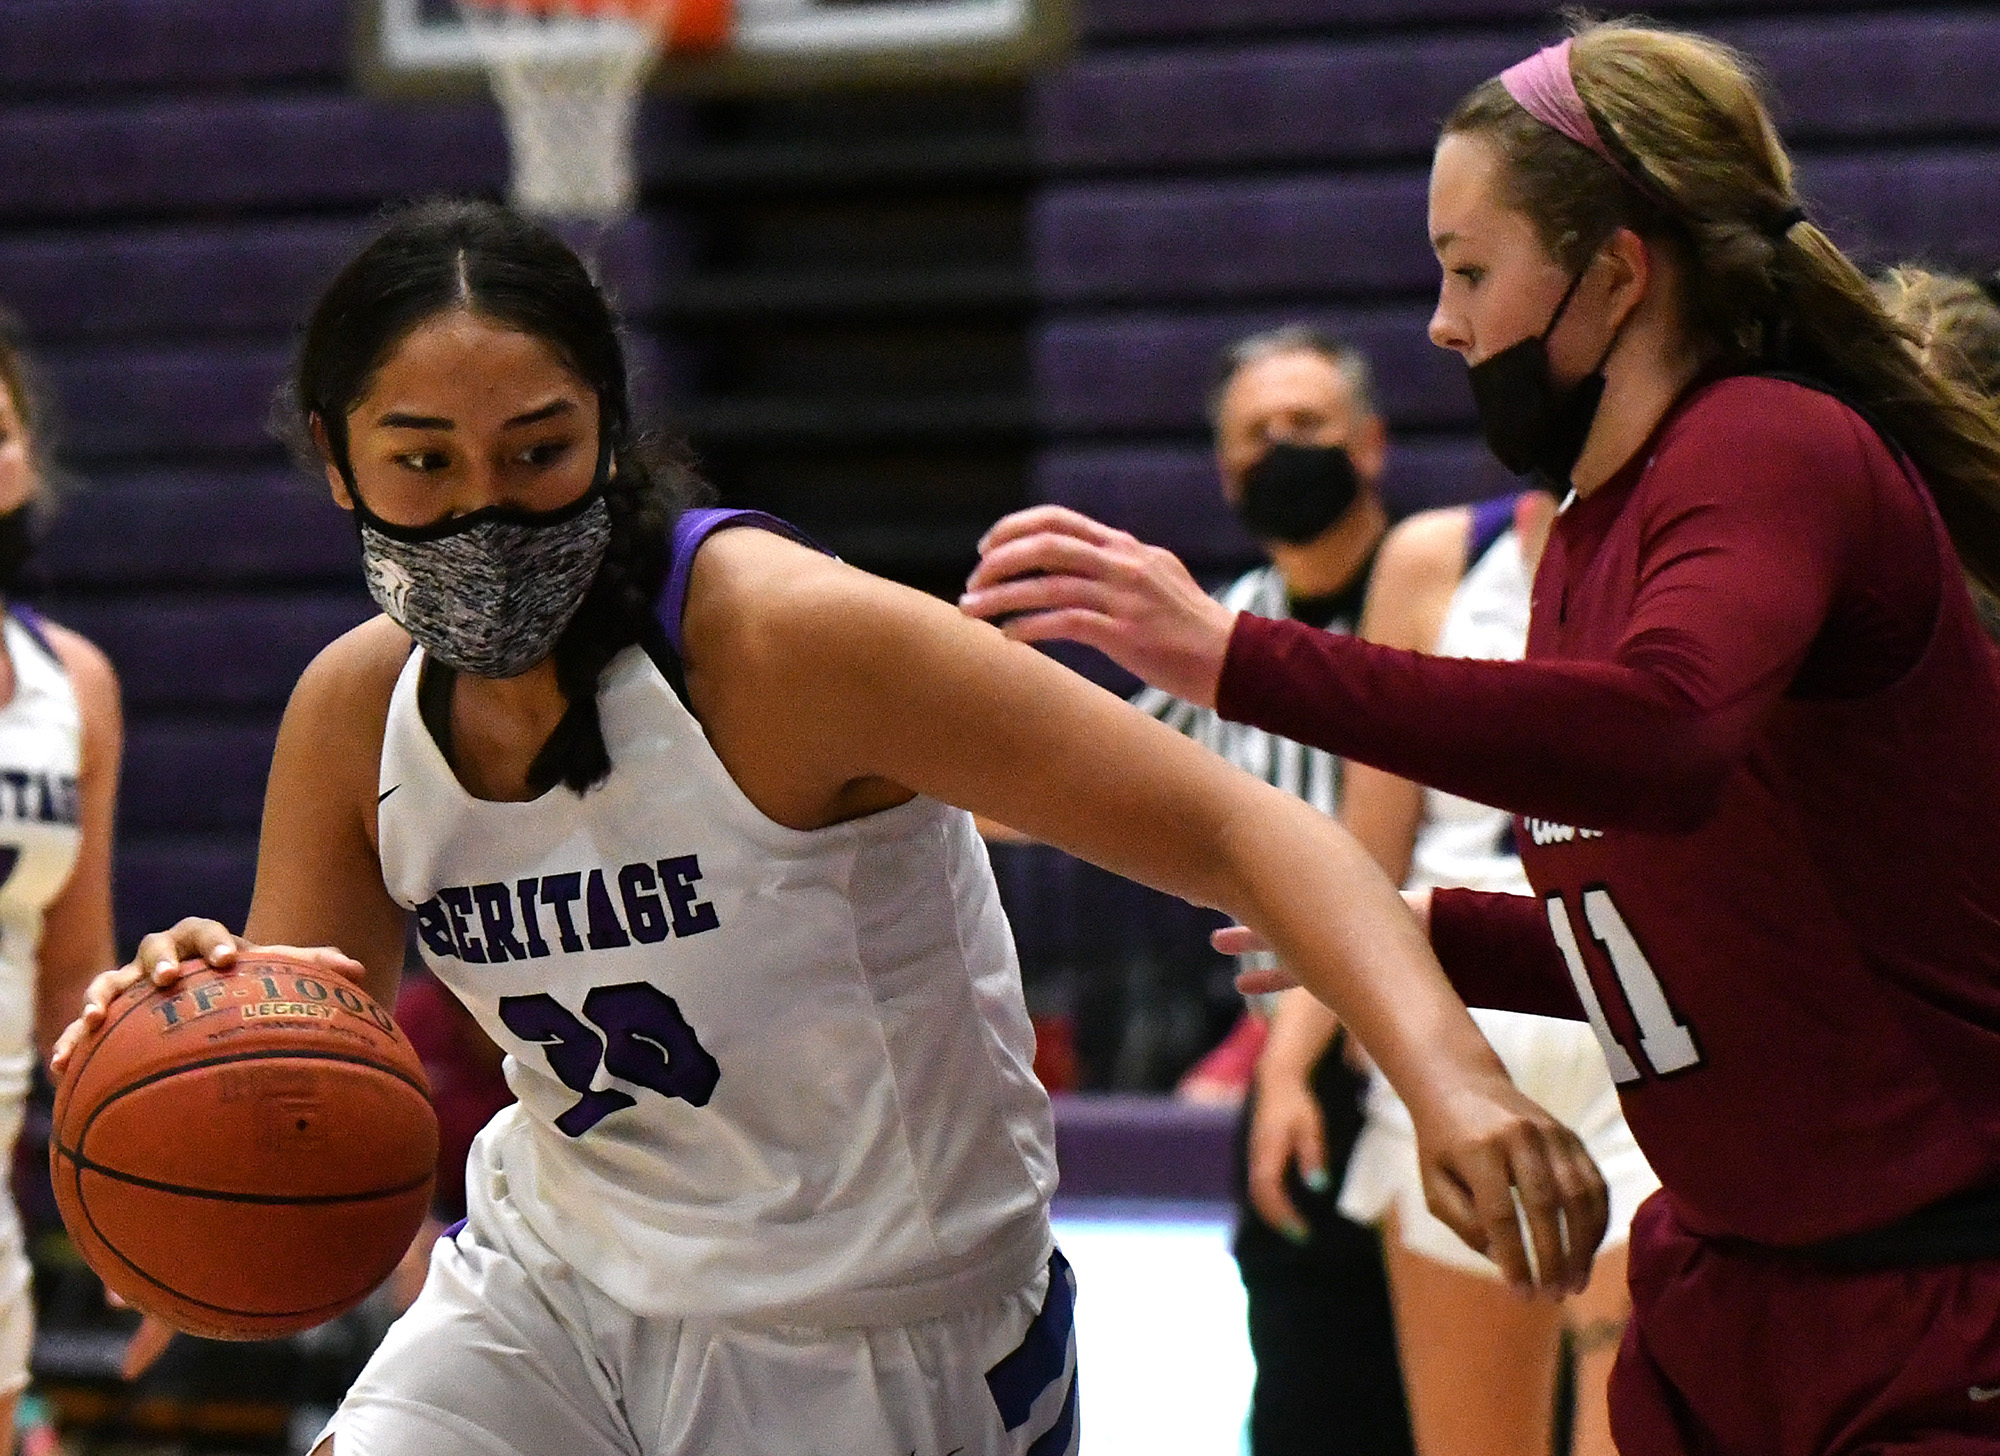 Heritage senior Katie Peneueta weaves toward the basket Thursday, May 20, 2021, during the Timberwolves’ 53-42 win against the Falcons at Heritage High School in Vancouver.